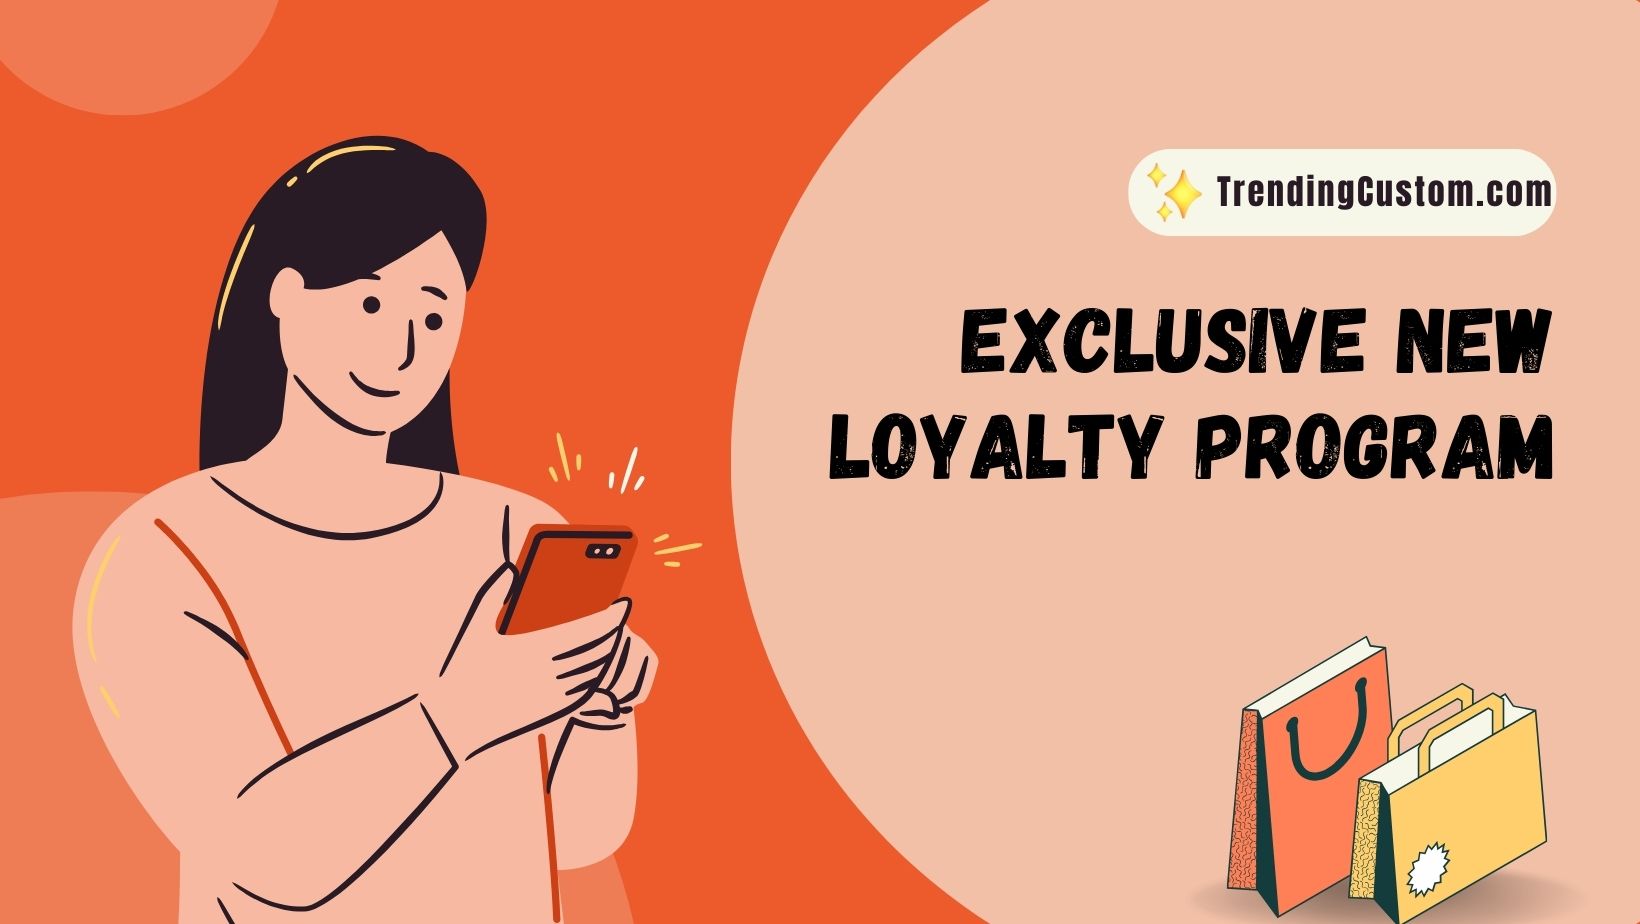 Are you ready for our Enhanced Loyalty Program?